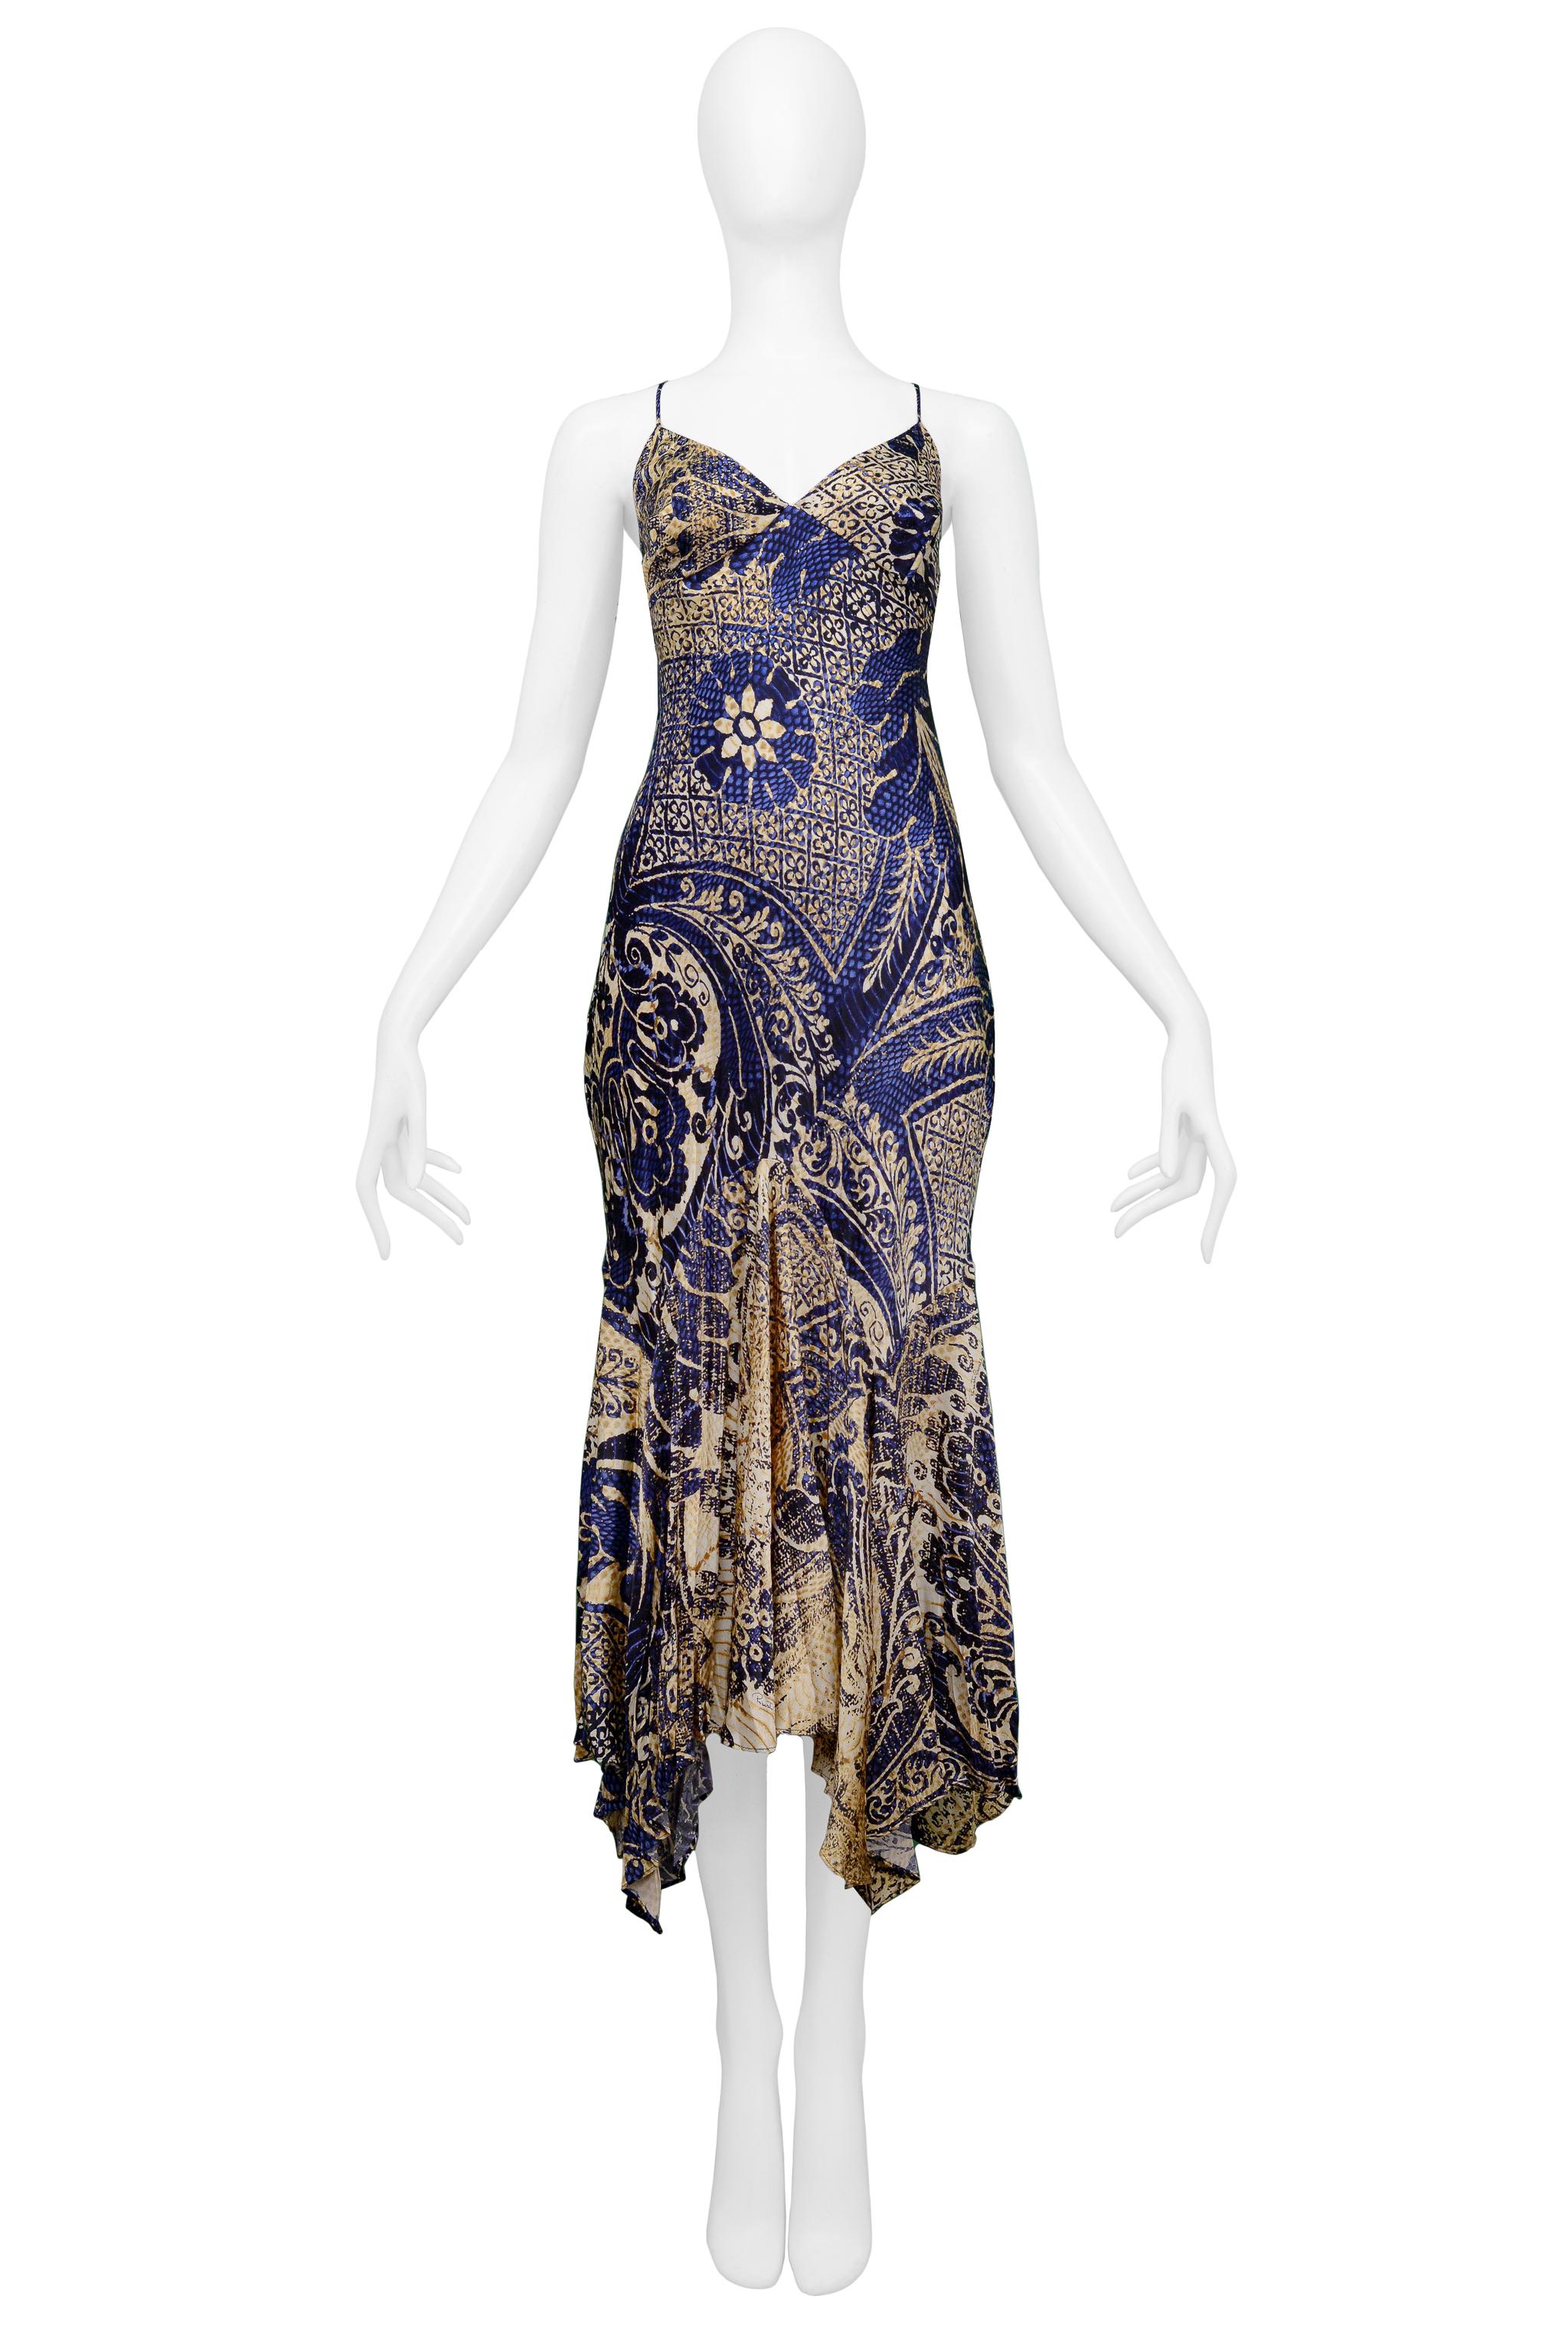 Resurrection Vintage is excited to present a vintage Roberto Cavalli tan dress with a decorative navy print featuring thin straps, a slip dress style bodice, and a flared hem. 

Roberto Cavalli
Size: 44
Silk
Excellent Vintage Condition 
Authenticity